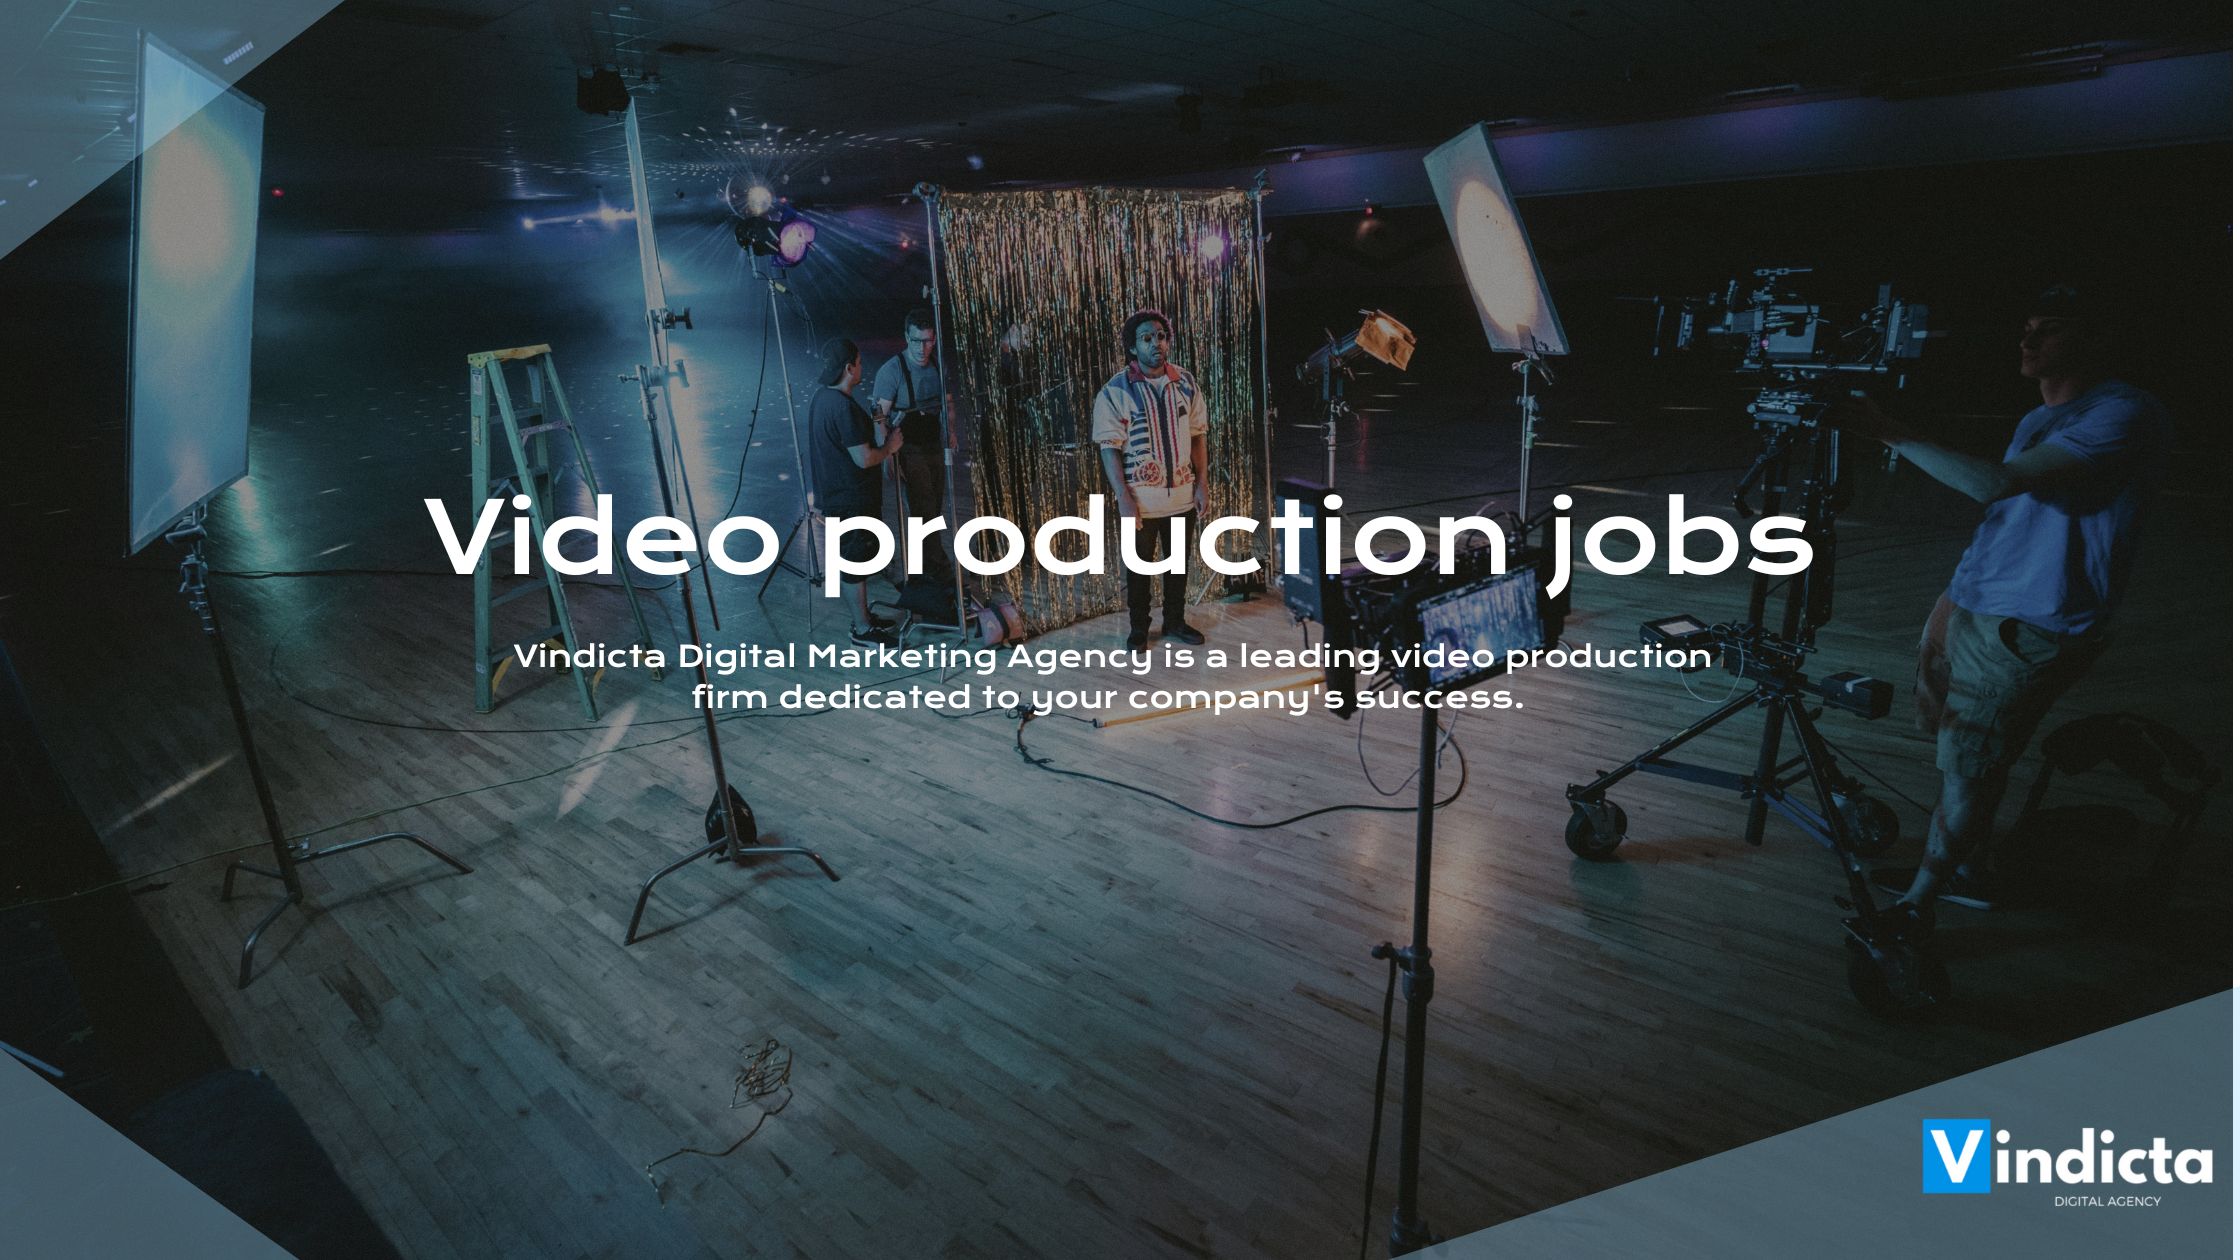 Video production jobs